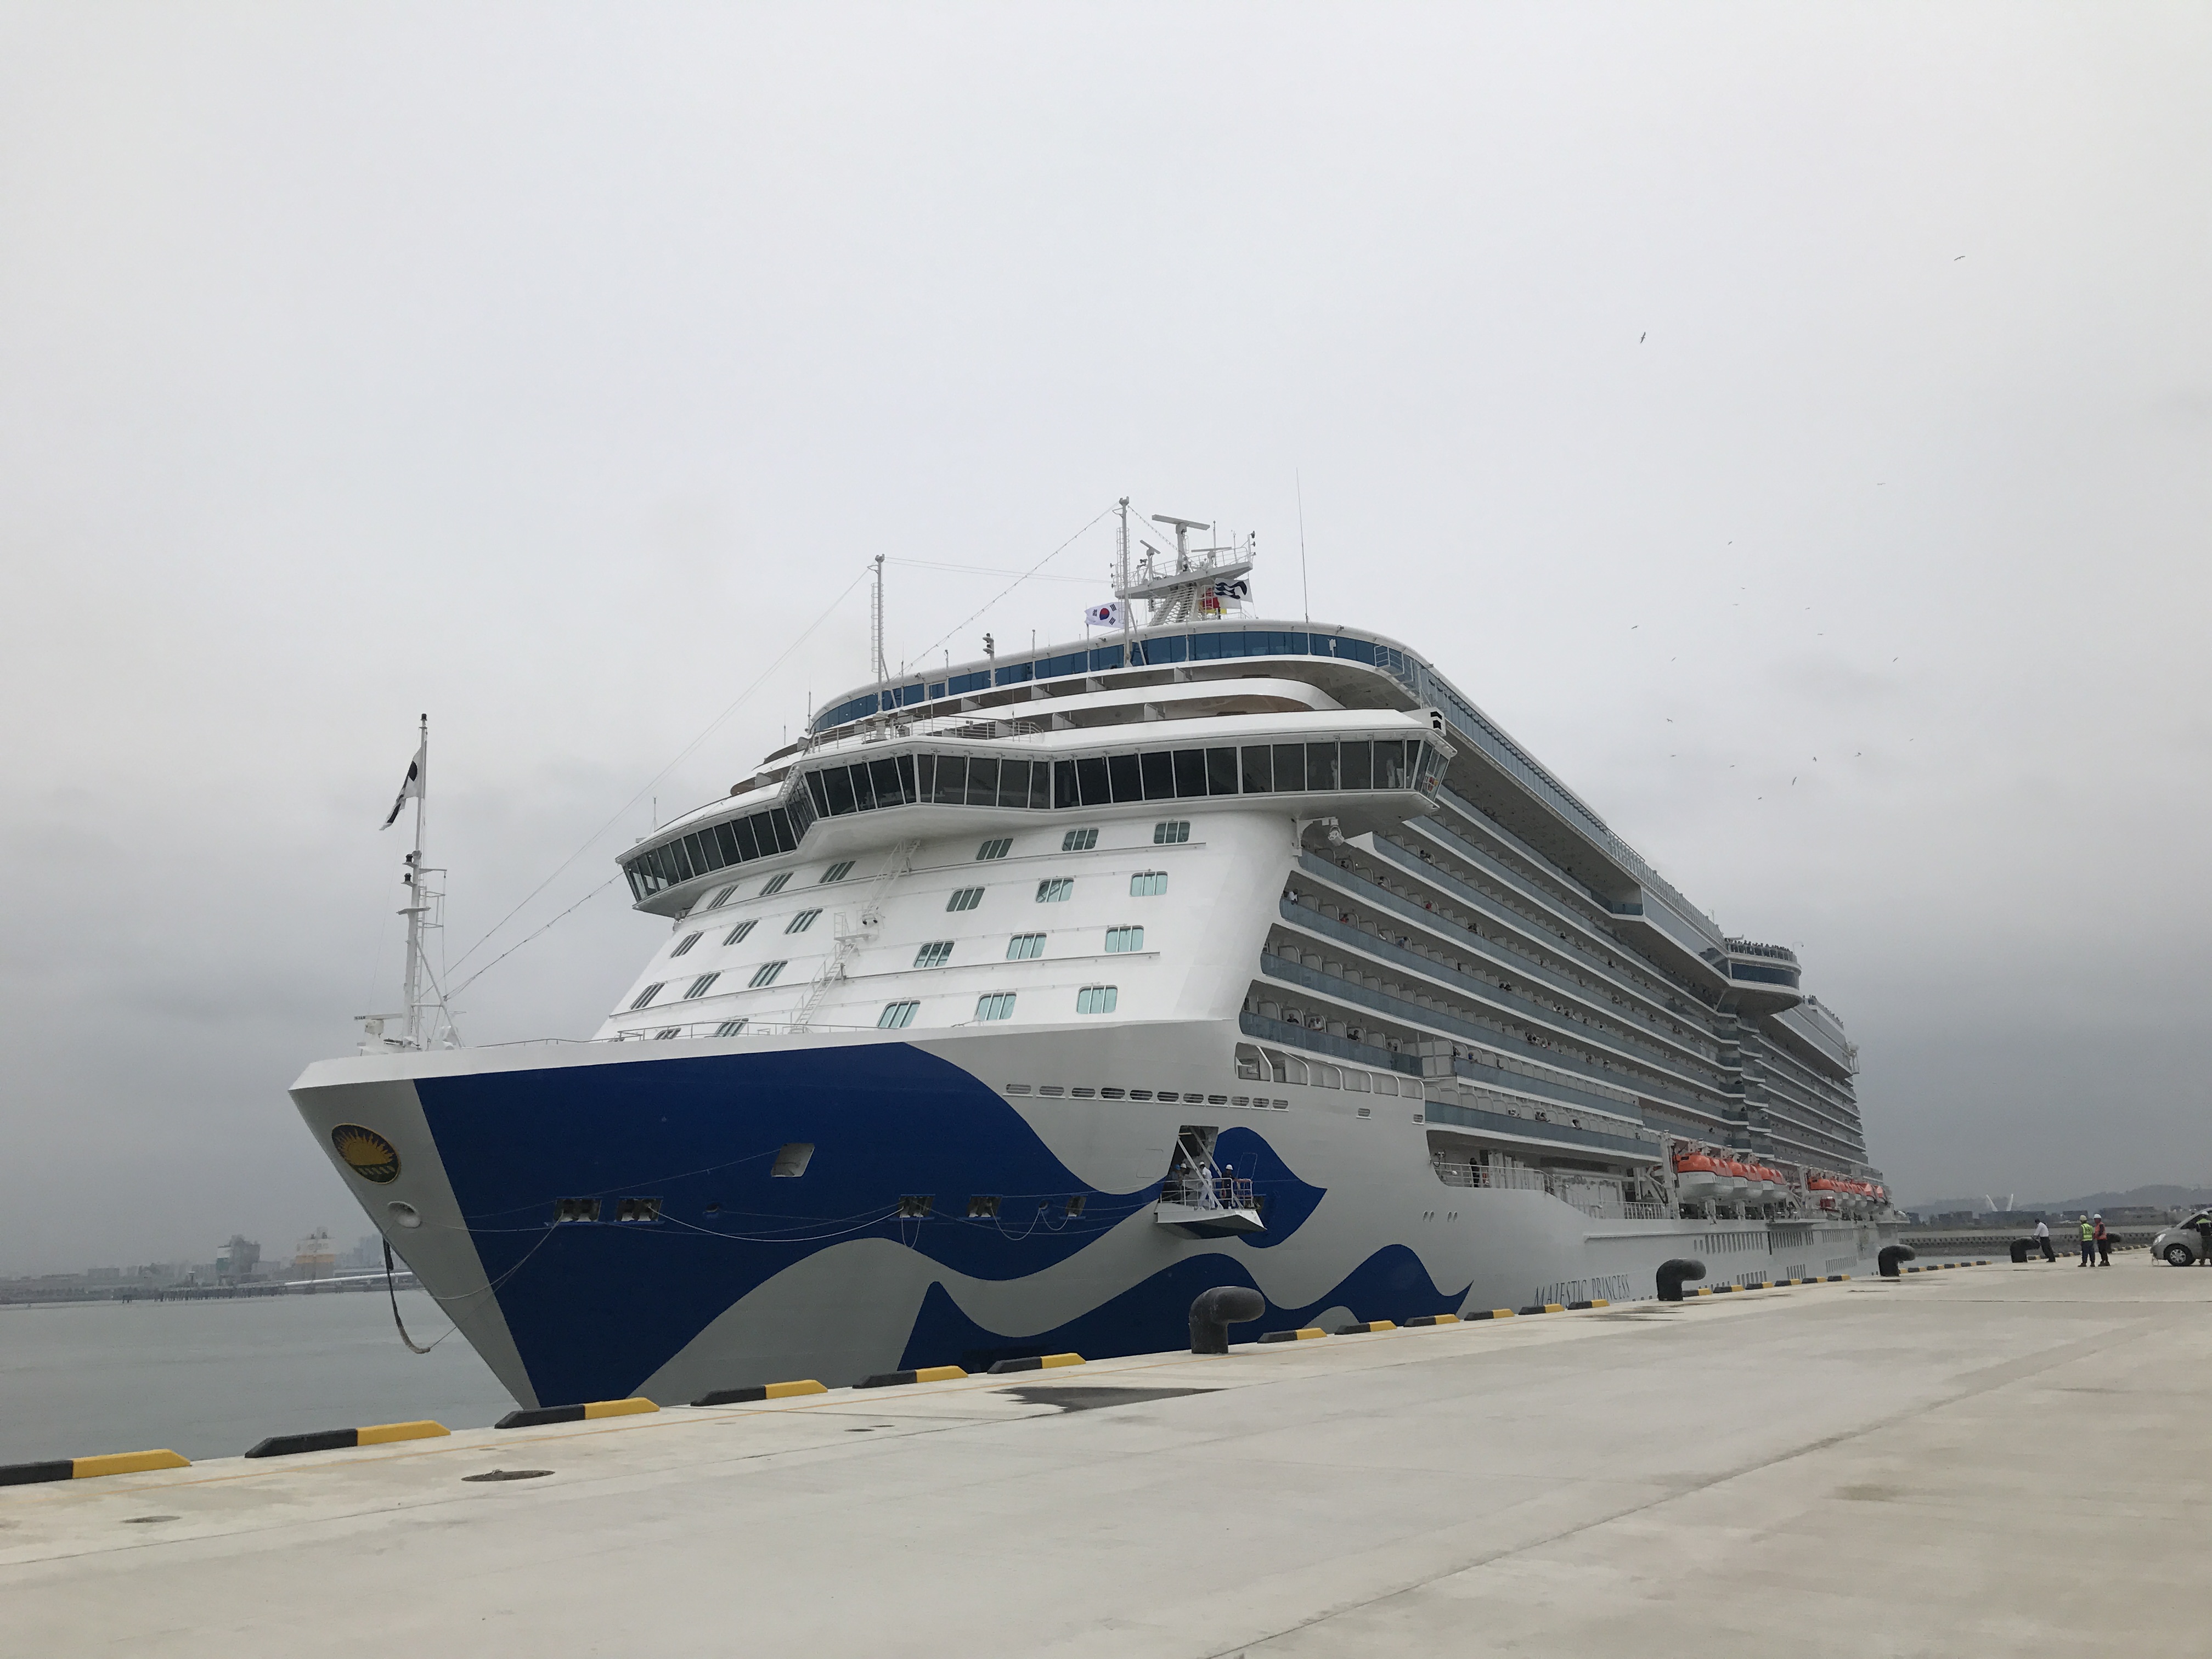 On the morning of July 7th, Princess Cruise’s Majestic Princess was docked at the Port of Incheon for the first time. 